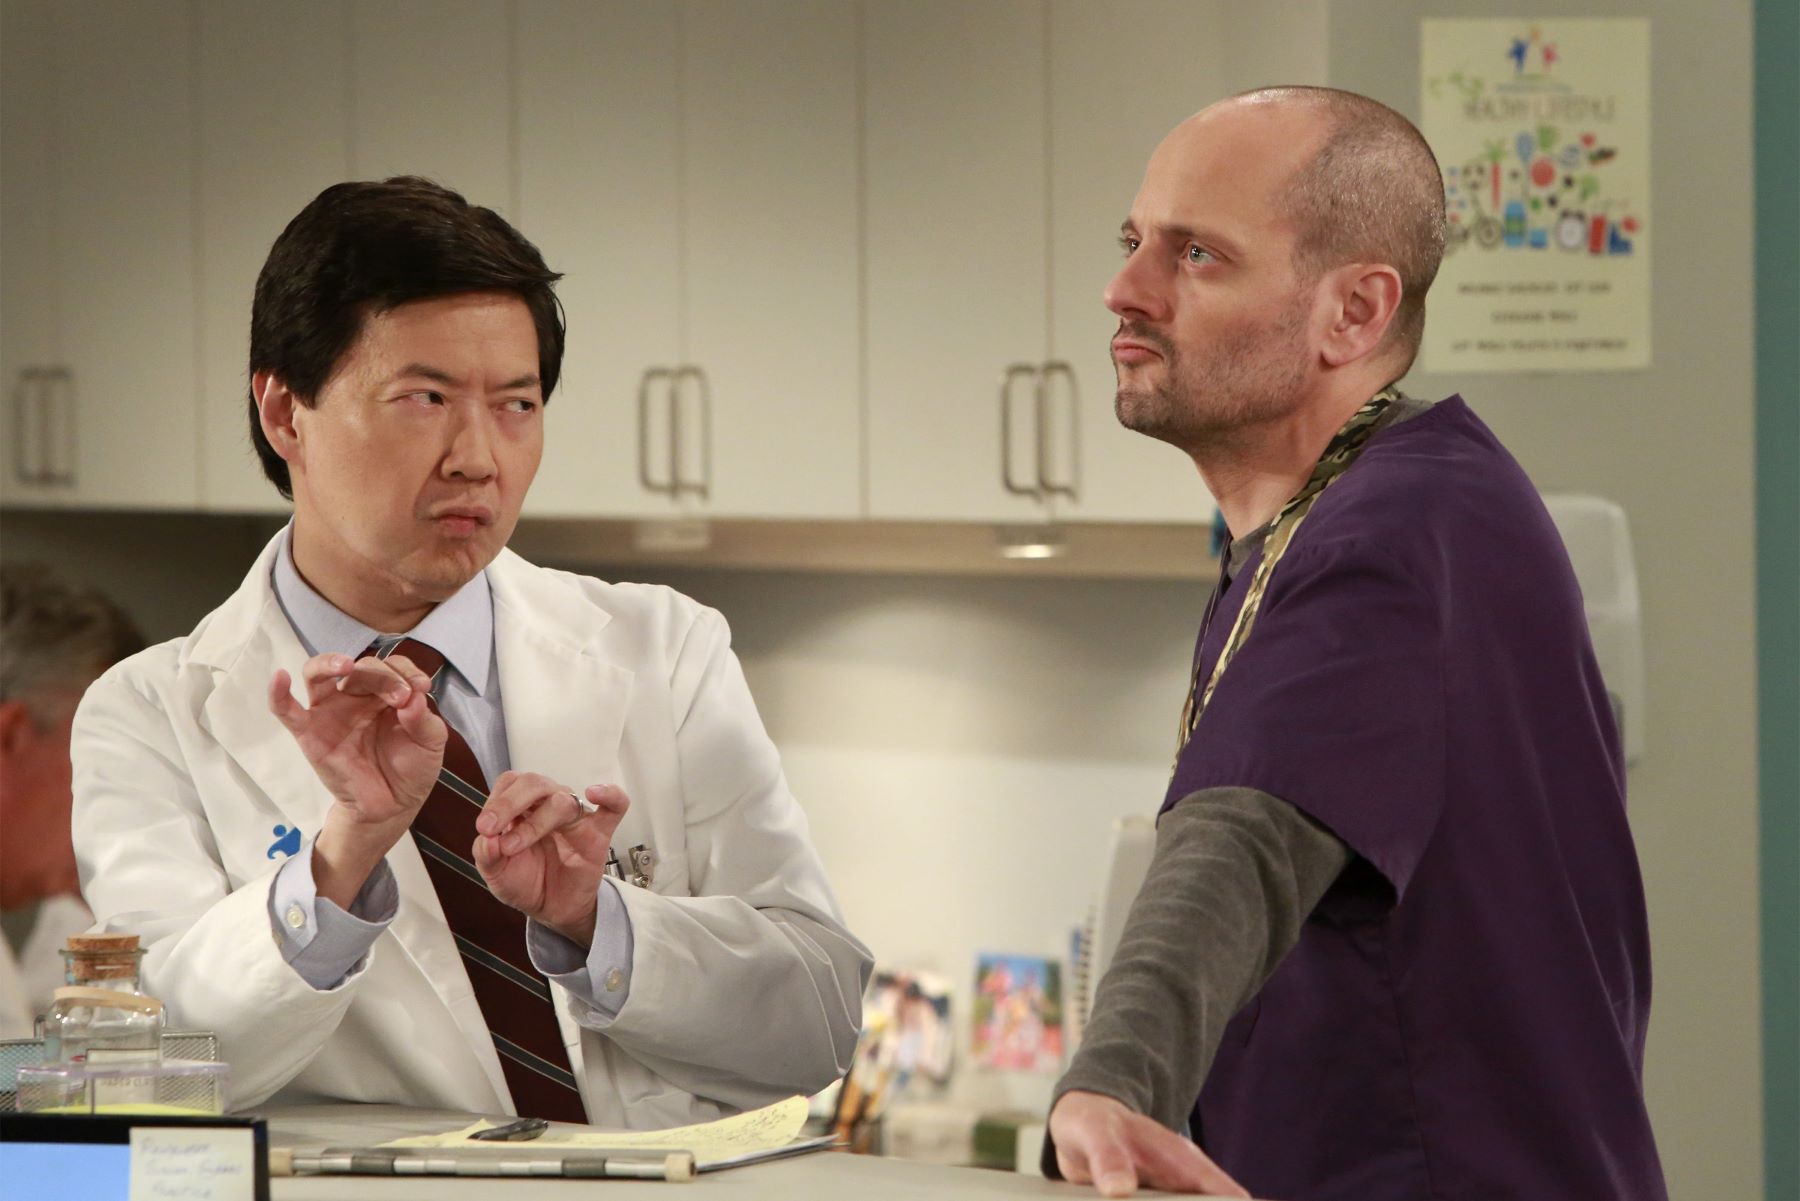 Real-Life Doctor Ken Jeong Stopped His Comedy Show to Help a Woman Suffering From a Health Emergency